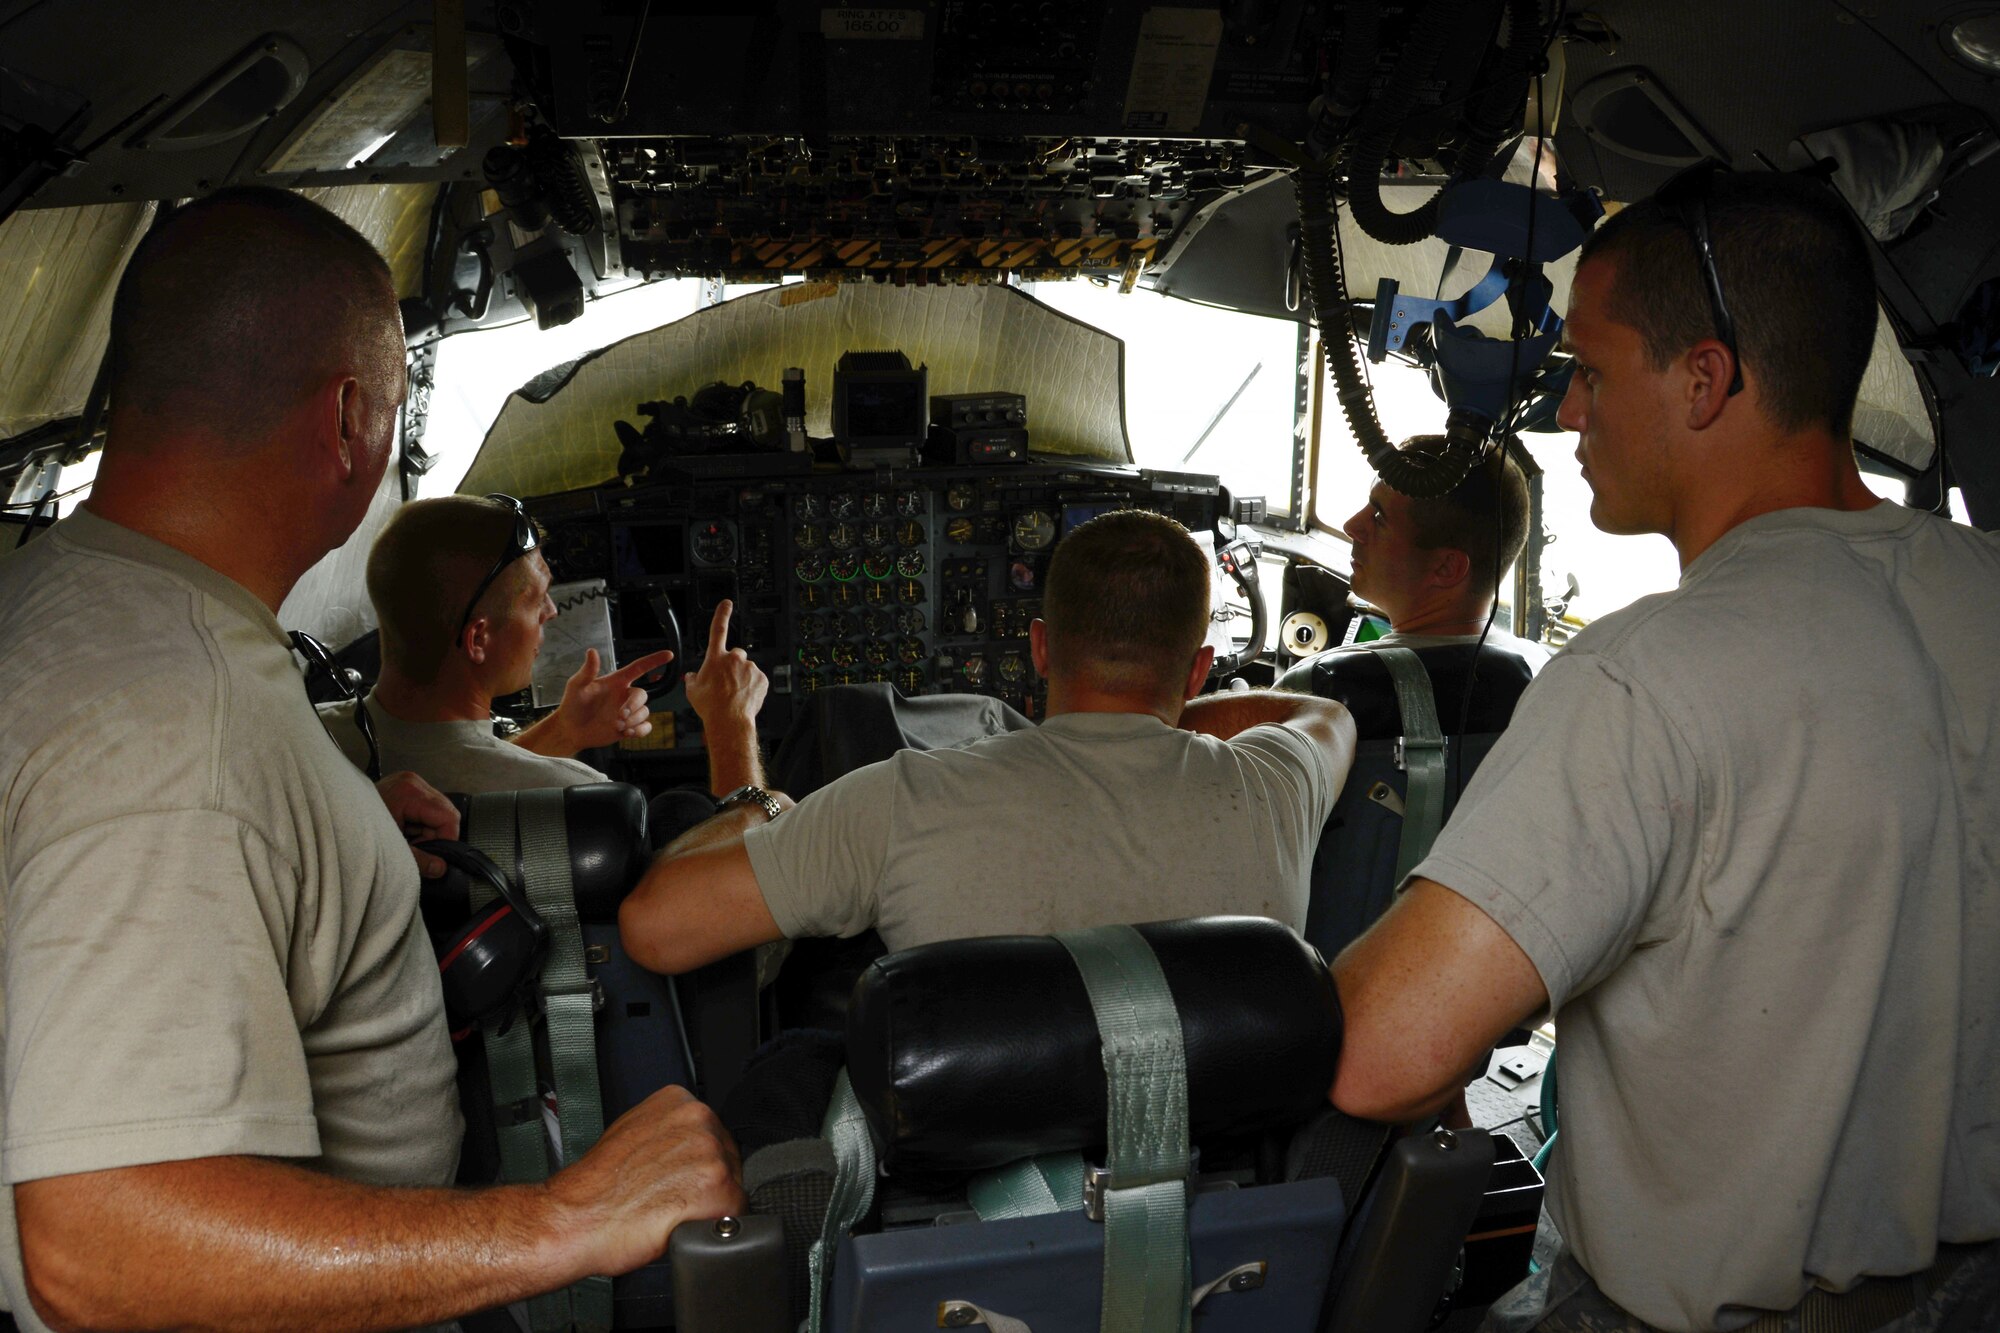 Airmen from both the 103rd Maintenance Squadron and 123rd Maintenance Group go over the auxiliary power unit checklist in the cockpit of the C-130H aircraft at the Combat Readiness Training Center, Gulfport, Miss., June 25, 2014. (U.S. Air National Guard photo by Senior Airman Jennifer Pierce)